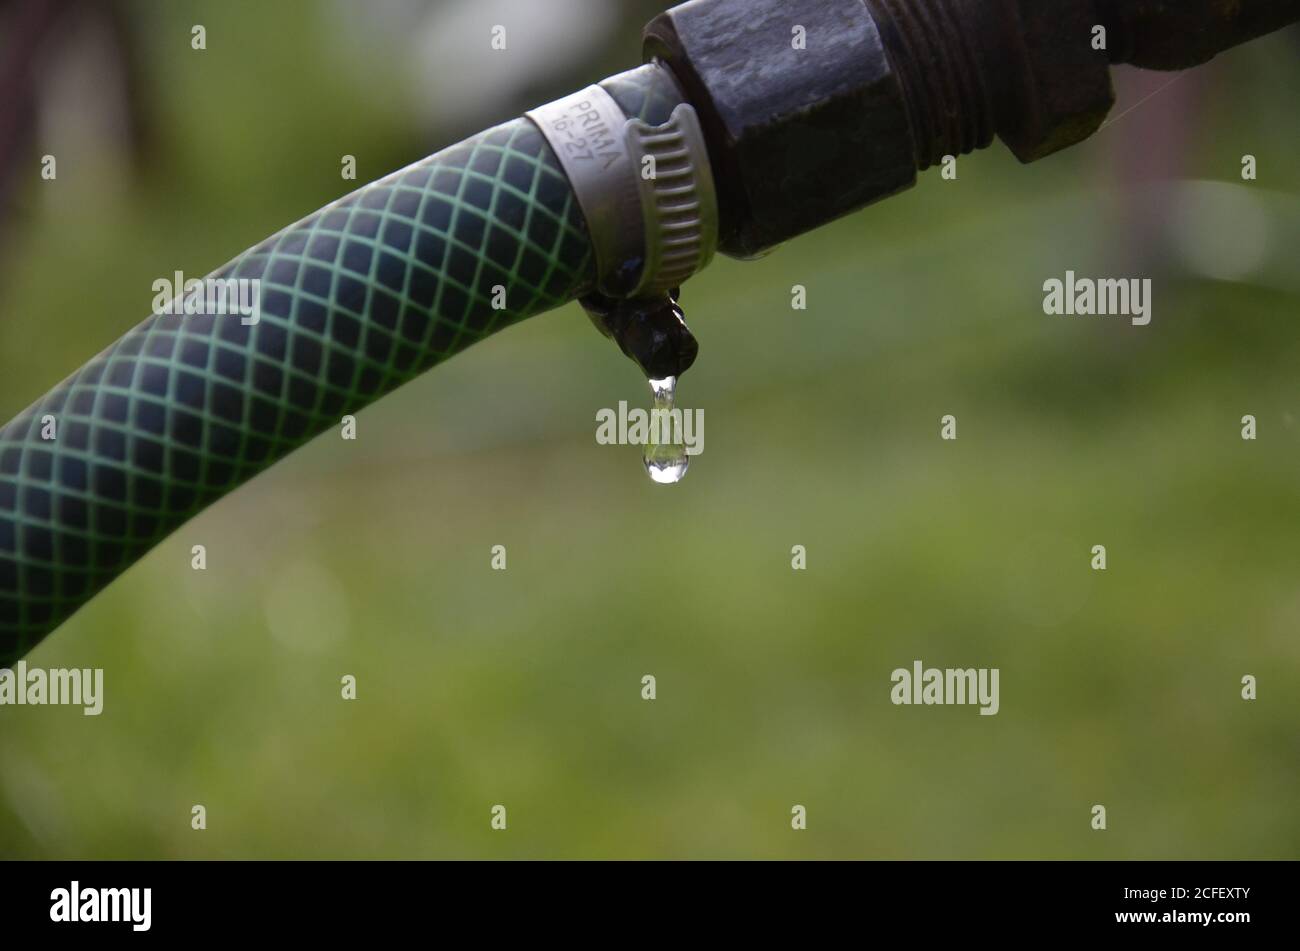 Wasting water in the garden, water leaking from a garden hose spigot.  Stock Photo